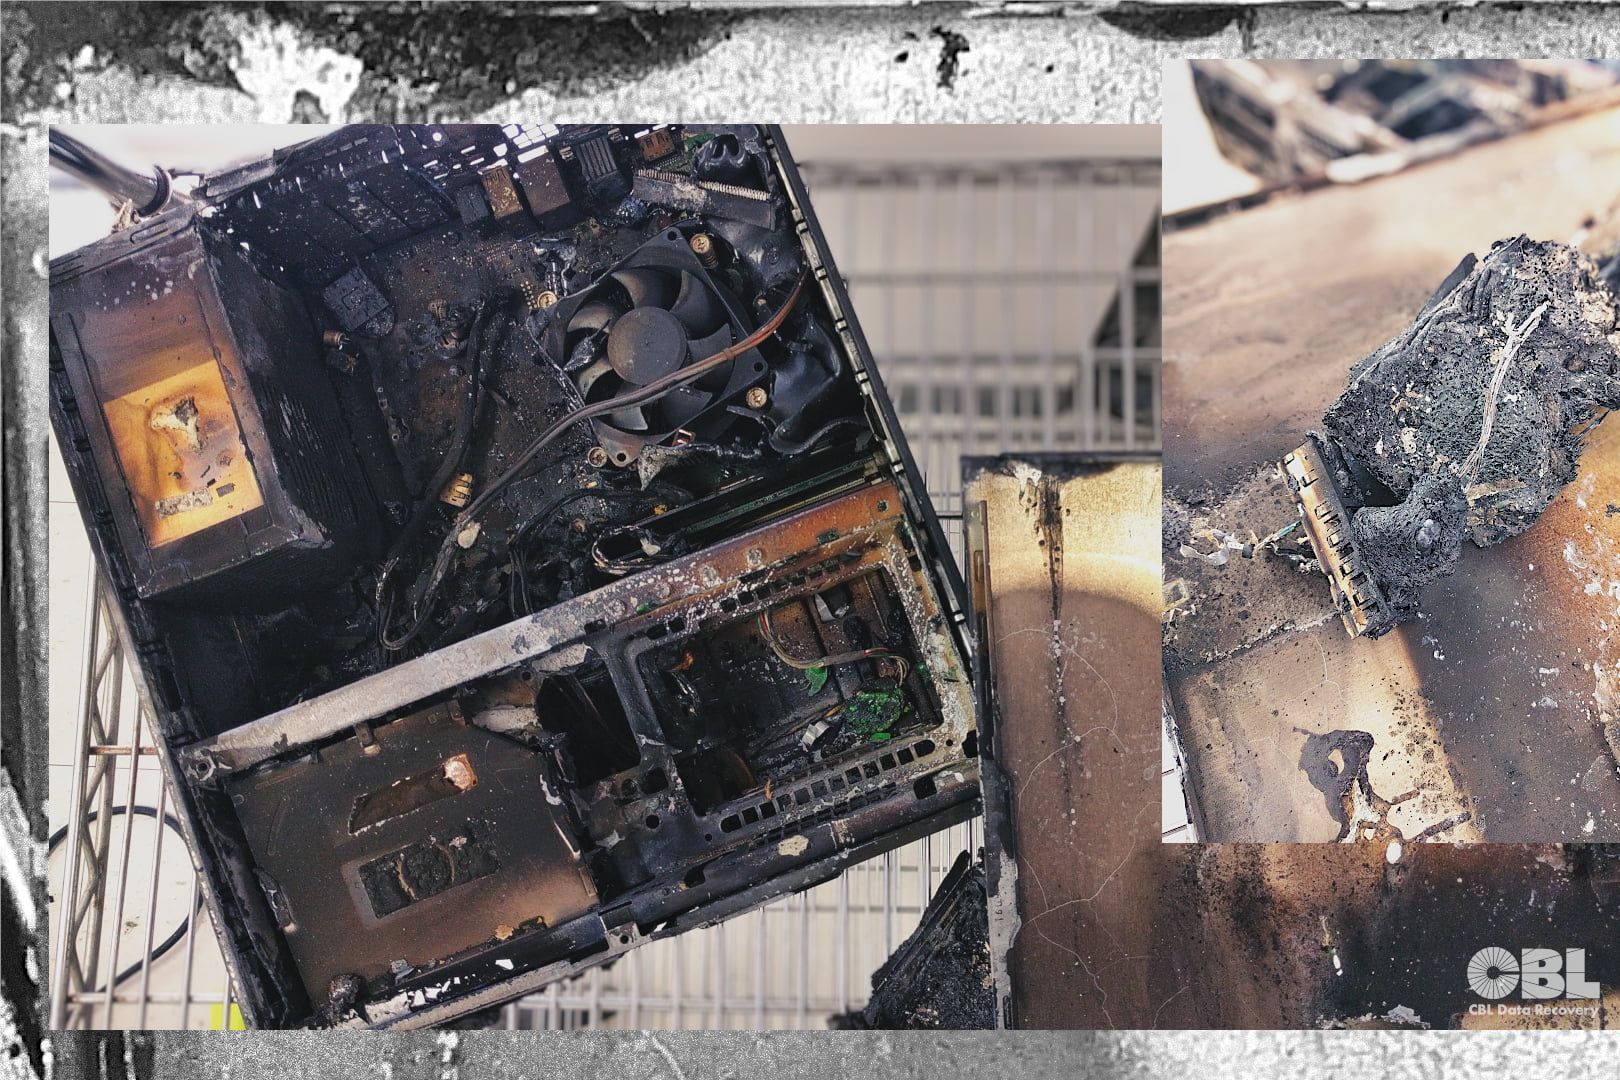 Top-down view of an open computer case, completely burned and fire-charred. Internal components like CPU fan, wires and drive bay skeleton are black and brown and slightly melted.